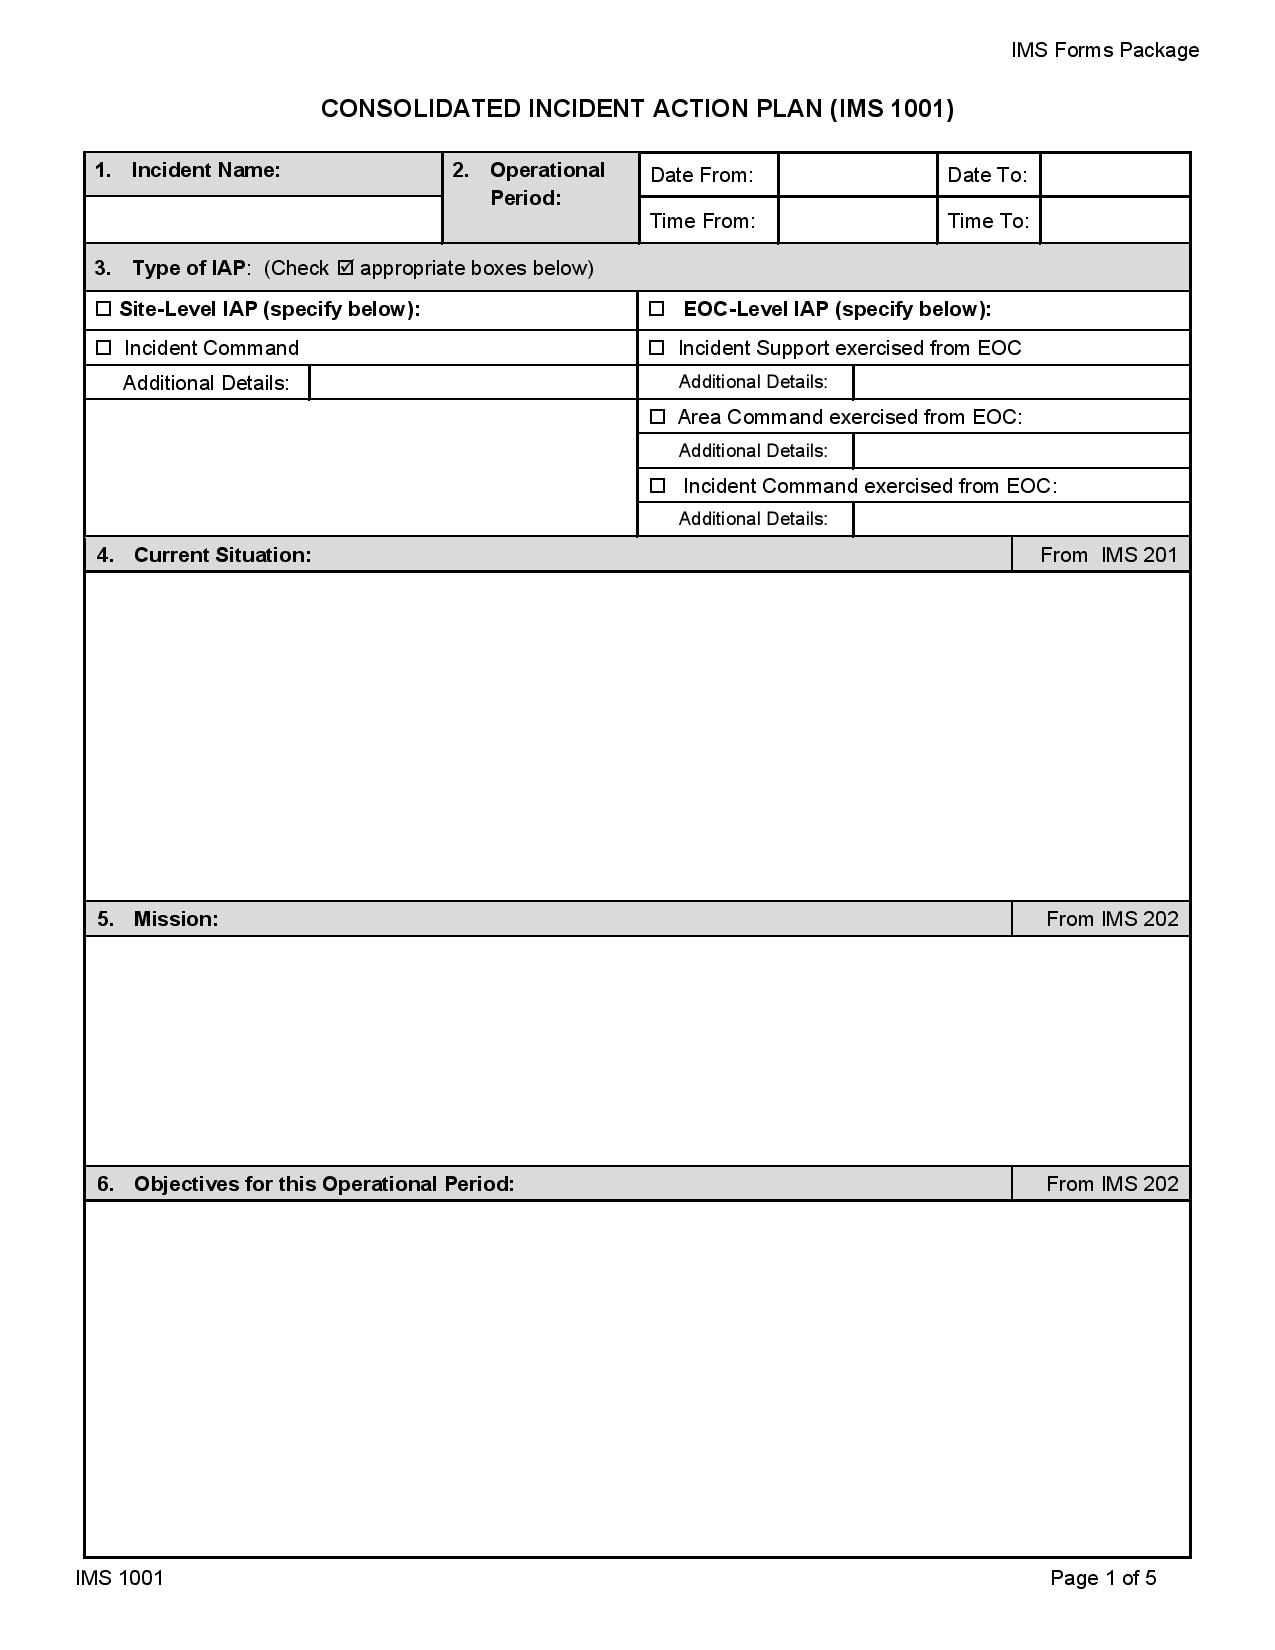 consolidated incident action plan form page 001